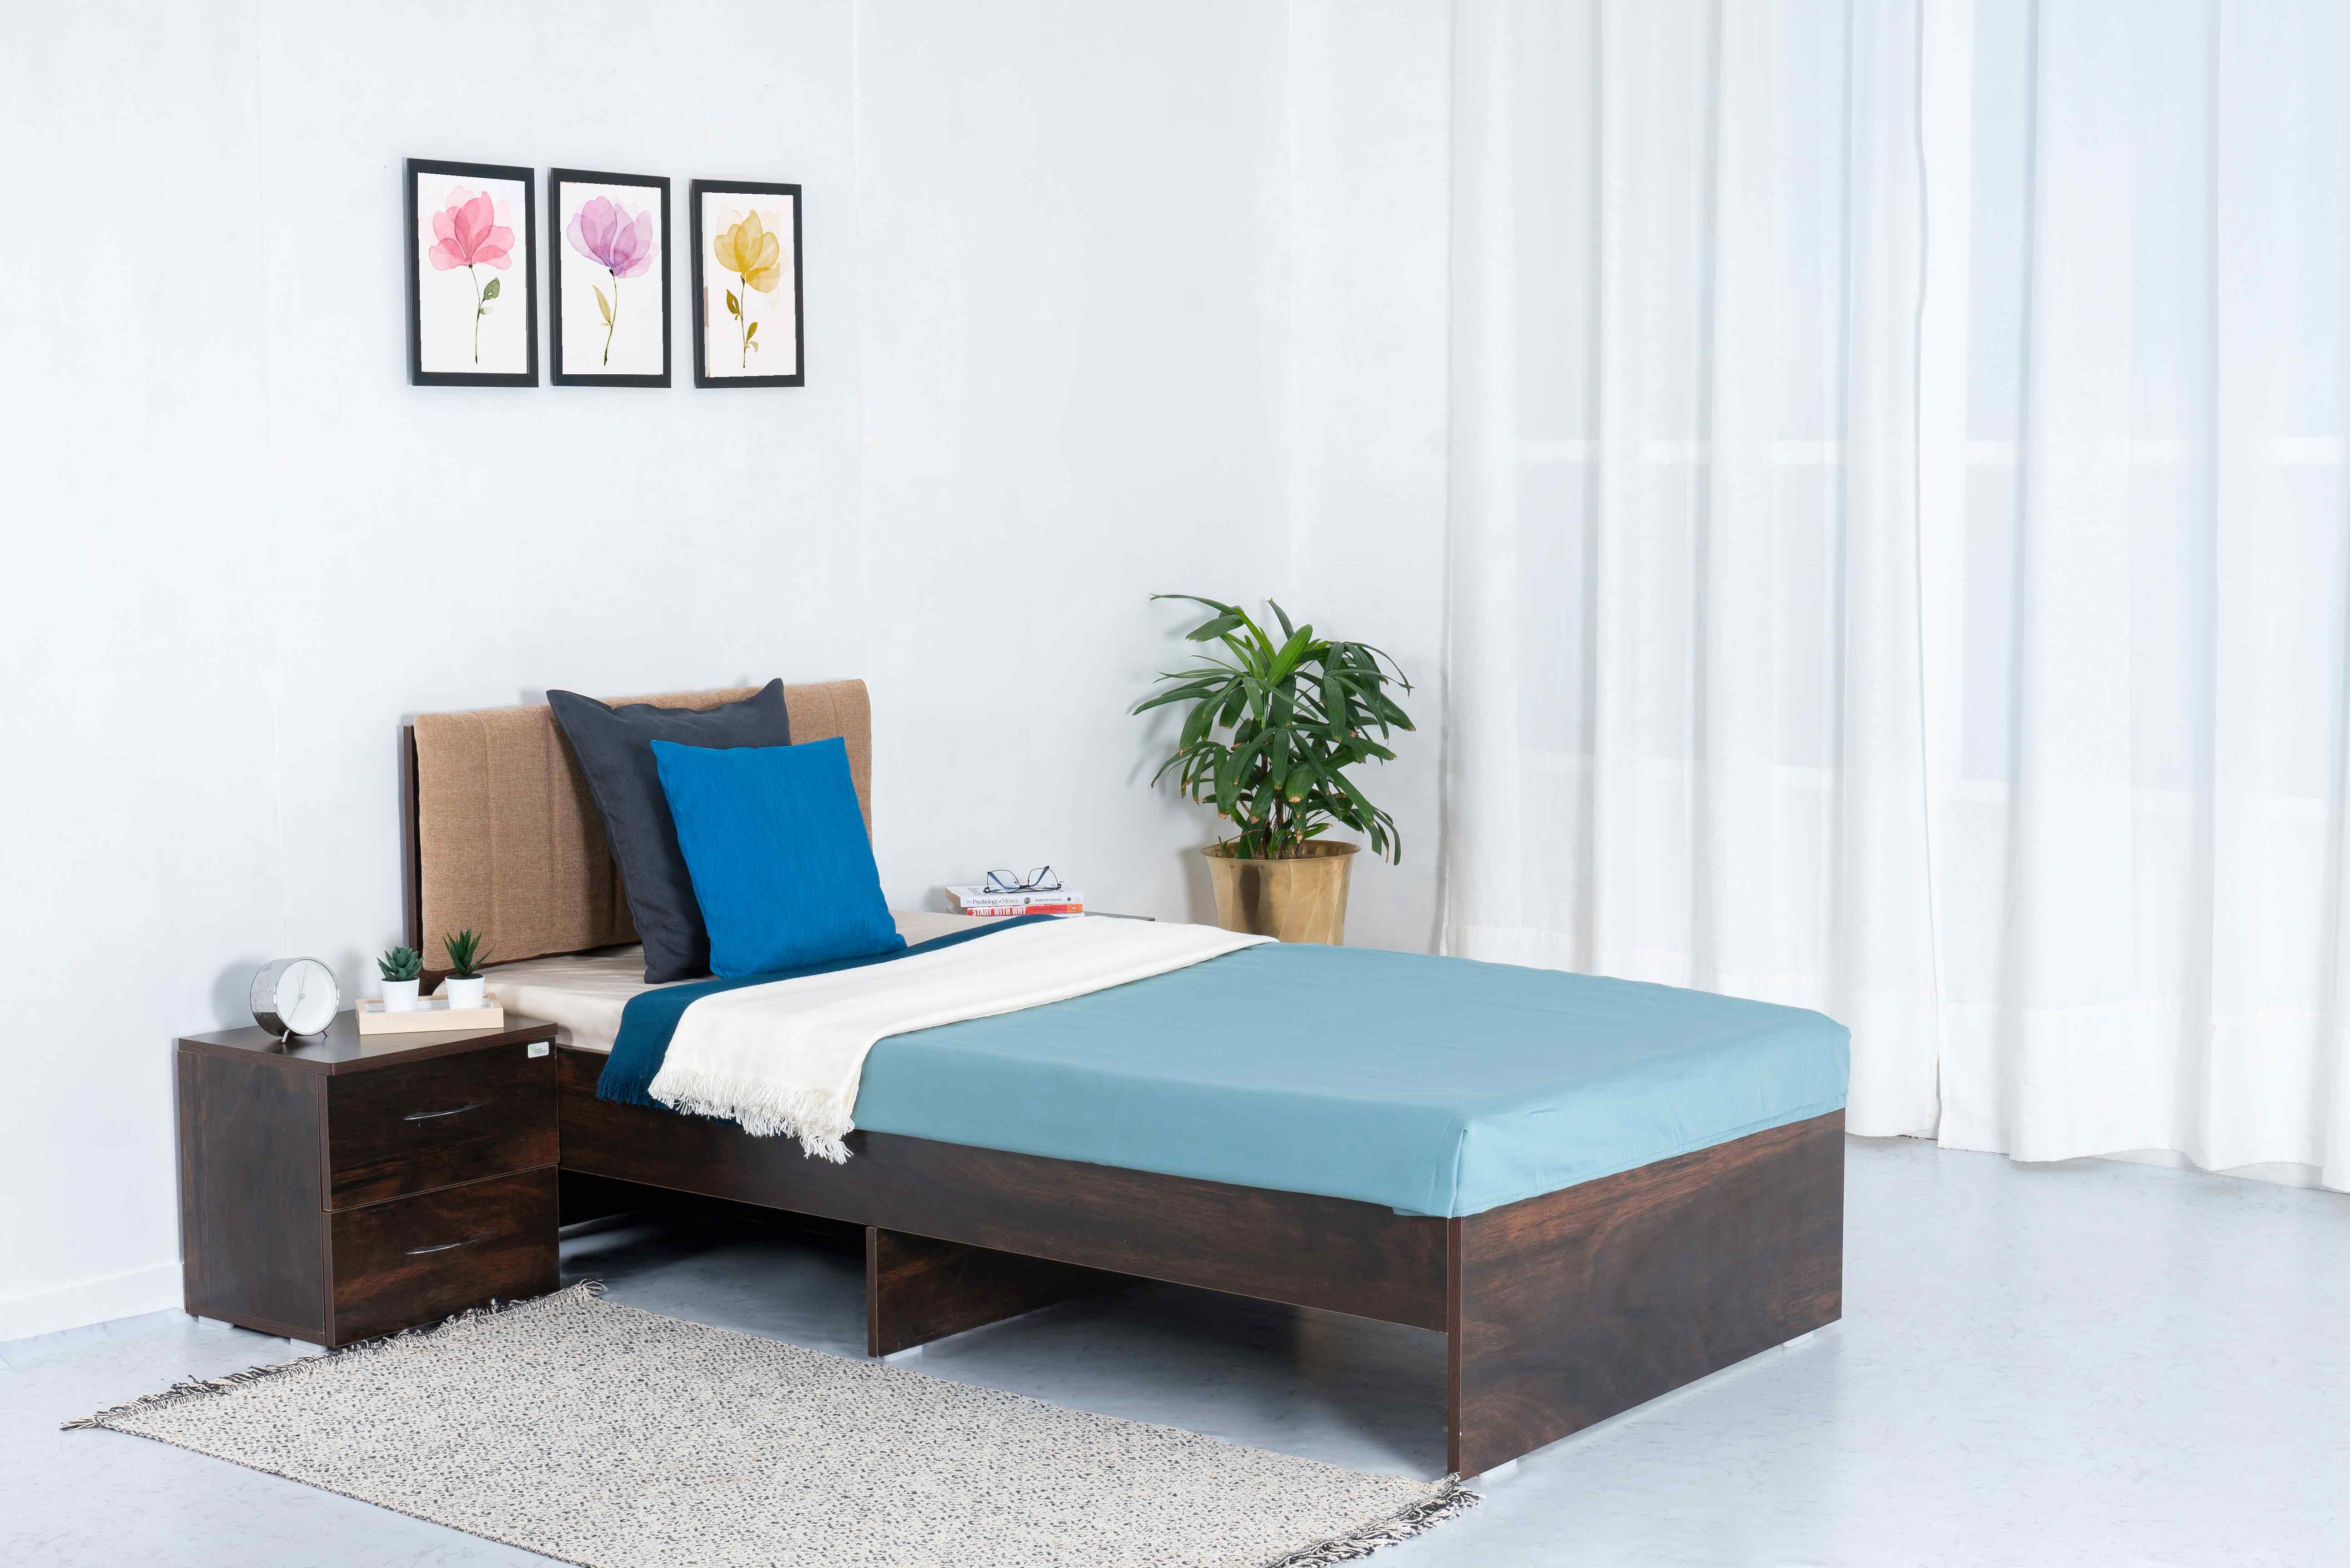 Sandy Beach Classic Wooden Single Bed with Mattress